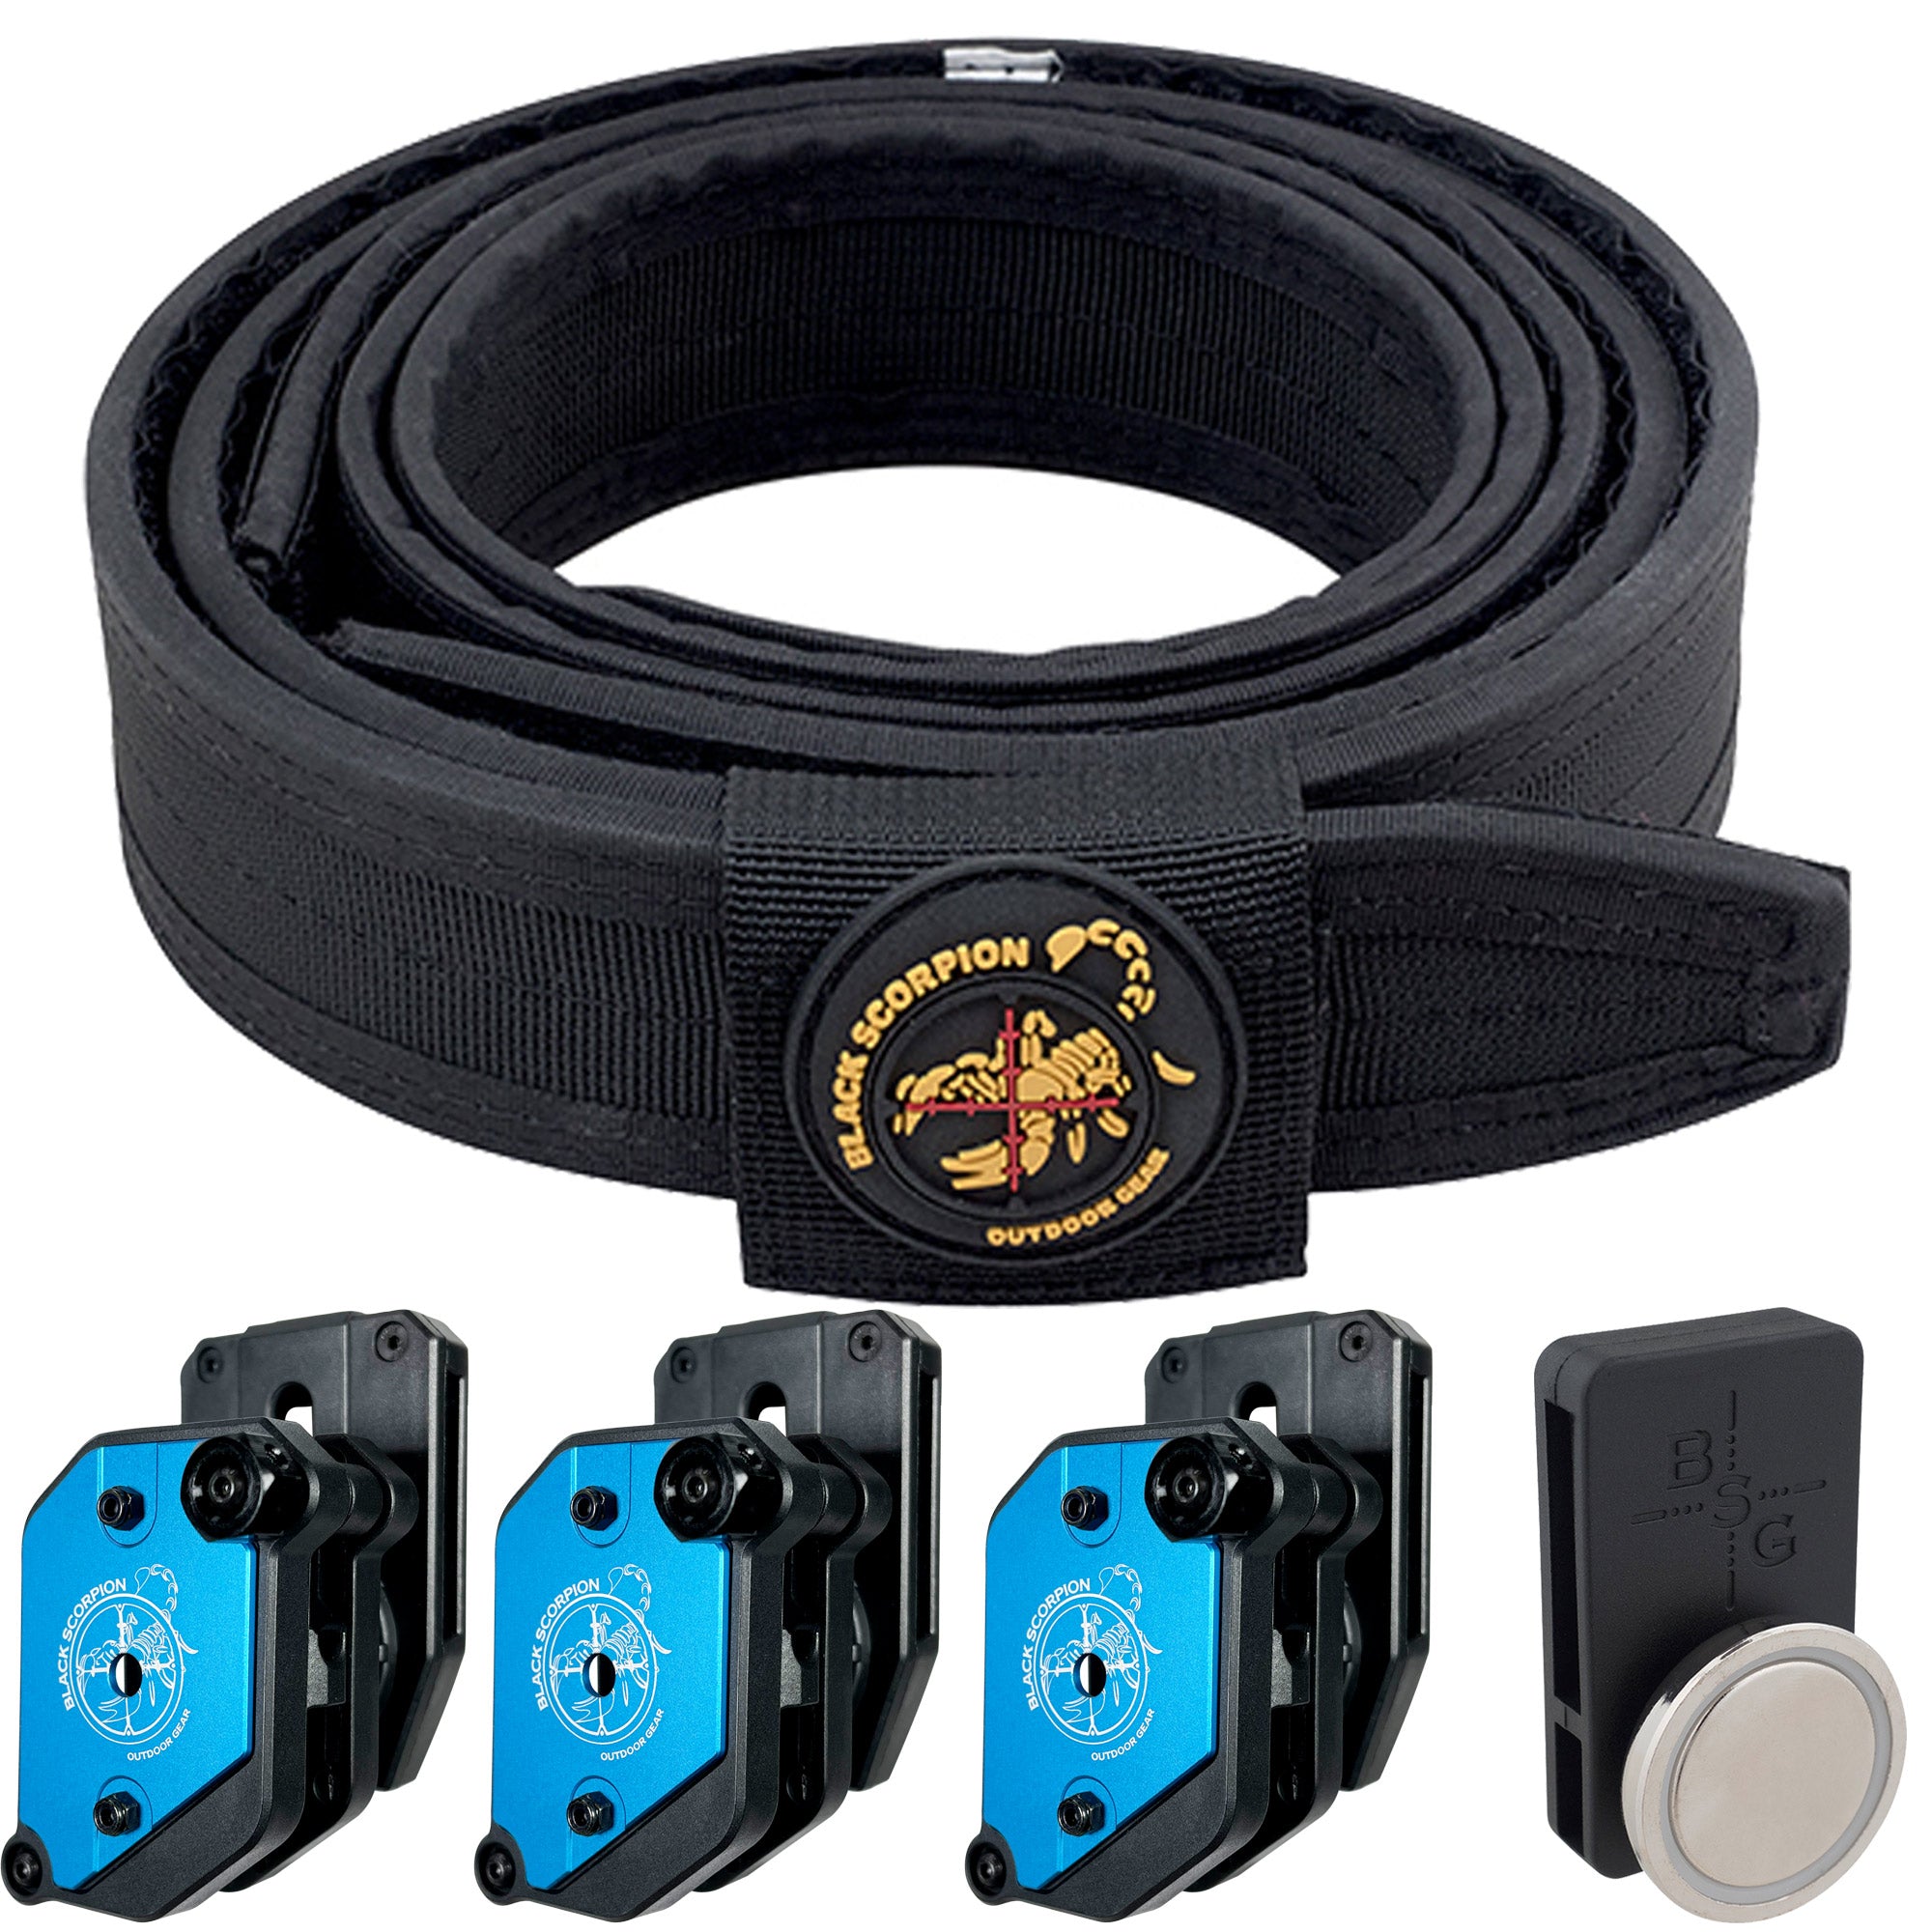 Competition Rig - 1 Heavy Duty Belt w/ 3 Ambidextrous Single/Double Stack Magazine Pouches and 1 Magnetic Magazine Pouch